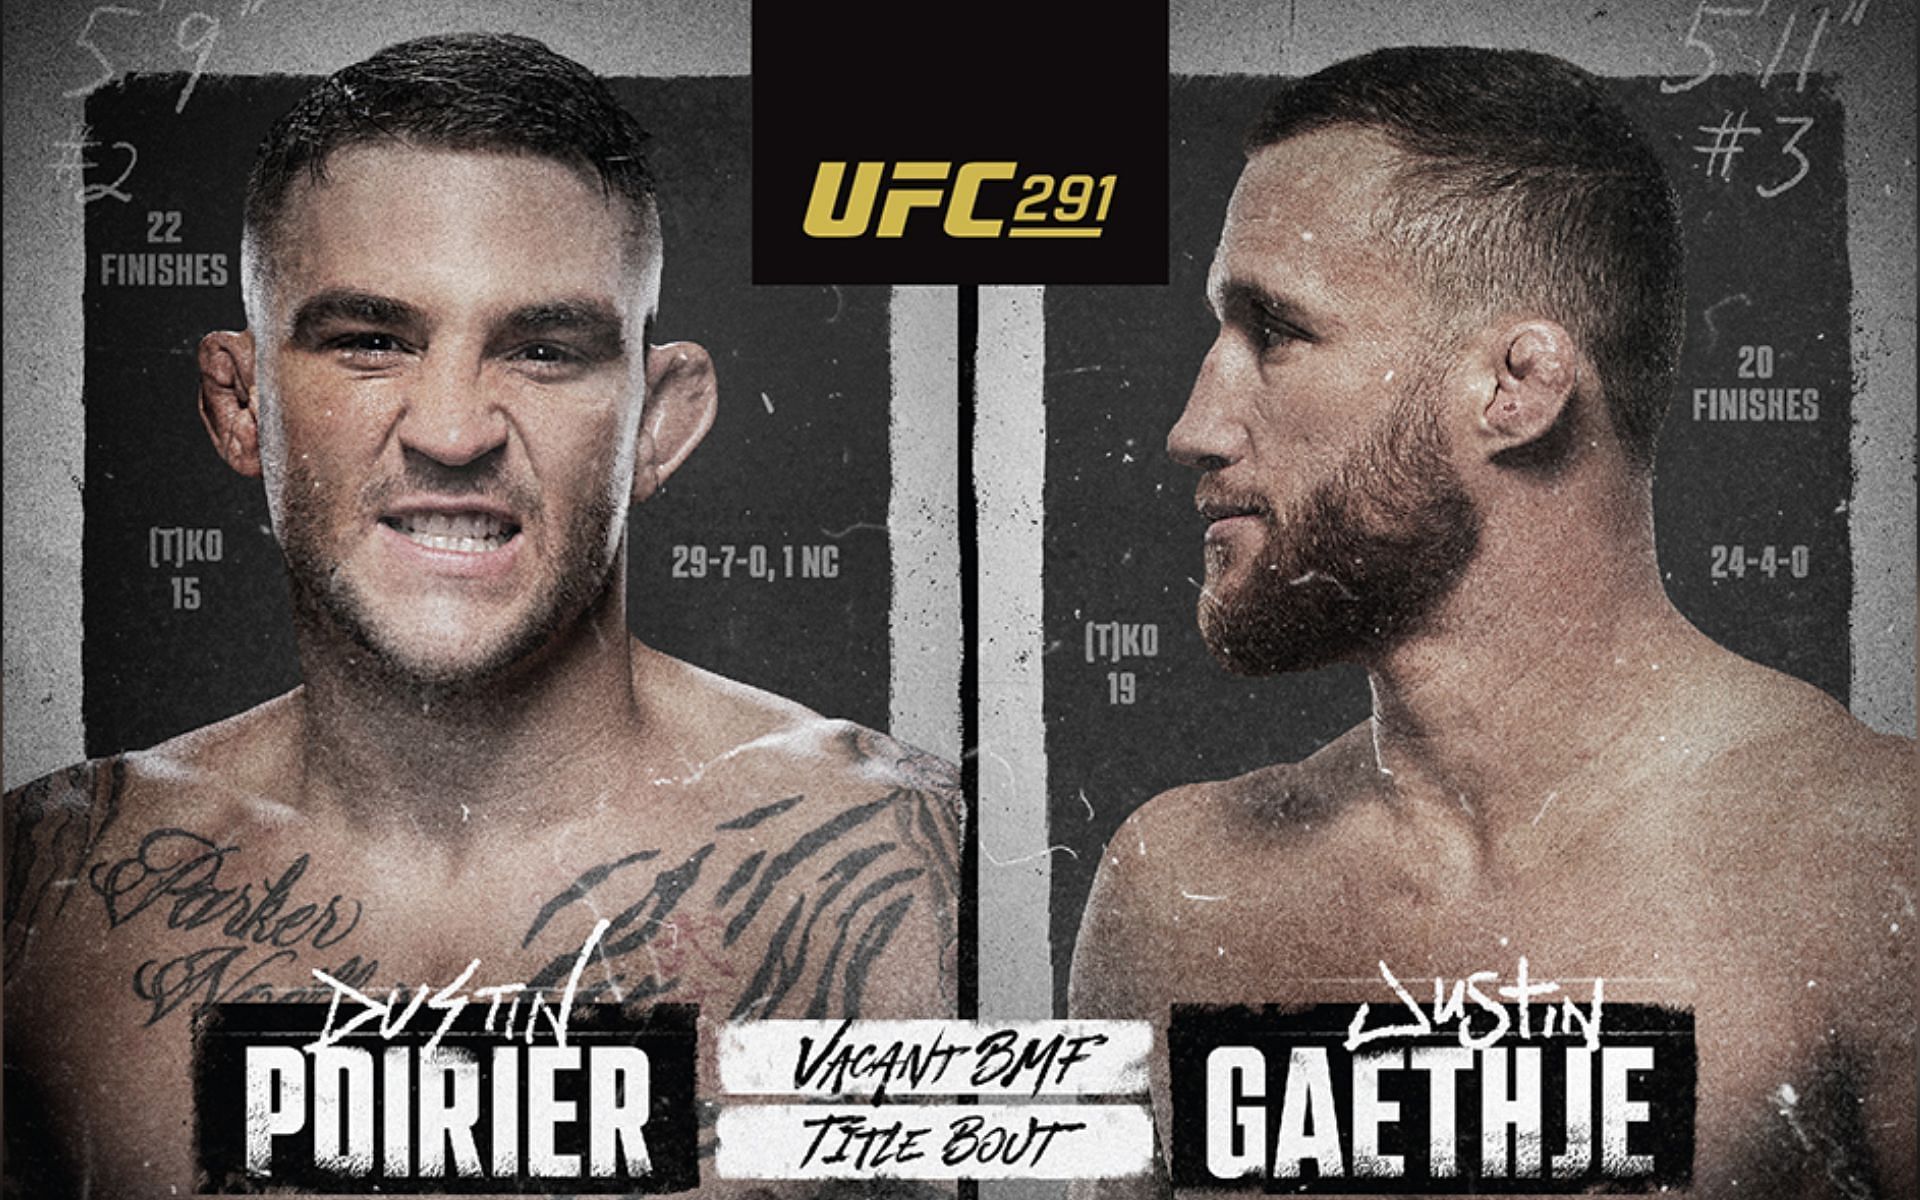 UFC 291 date Everything about UFC 291 Date, venue, fight card, pay-per-view prices, ticket prices and more revealed here